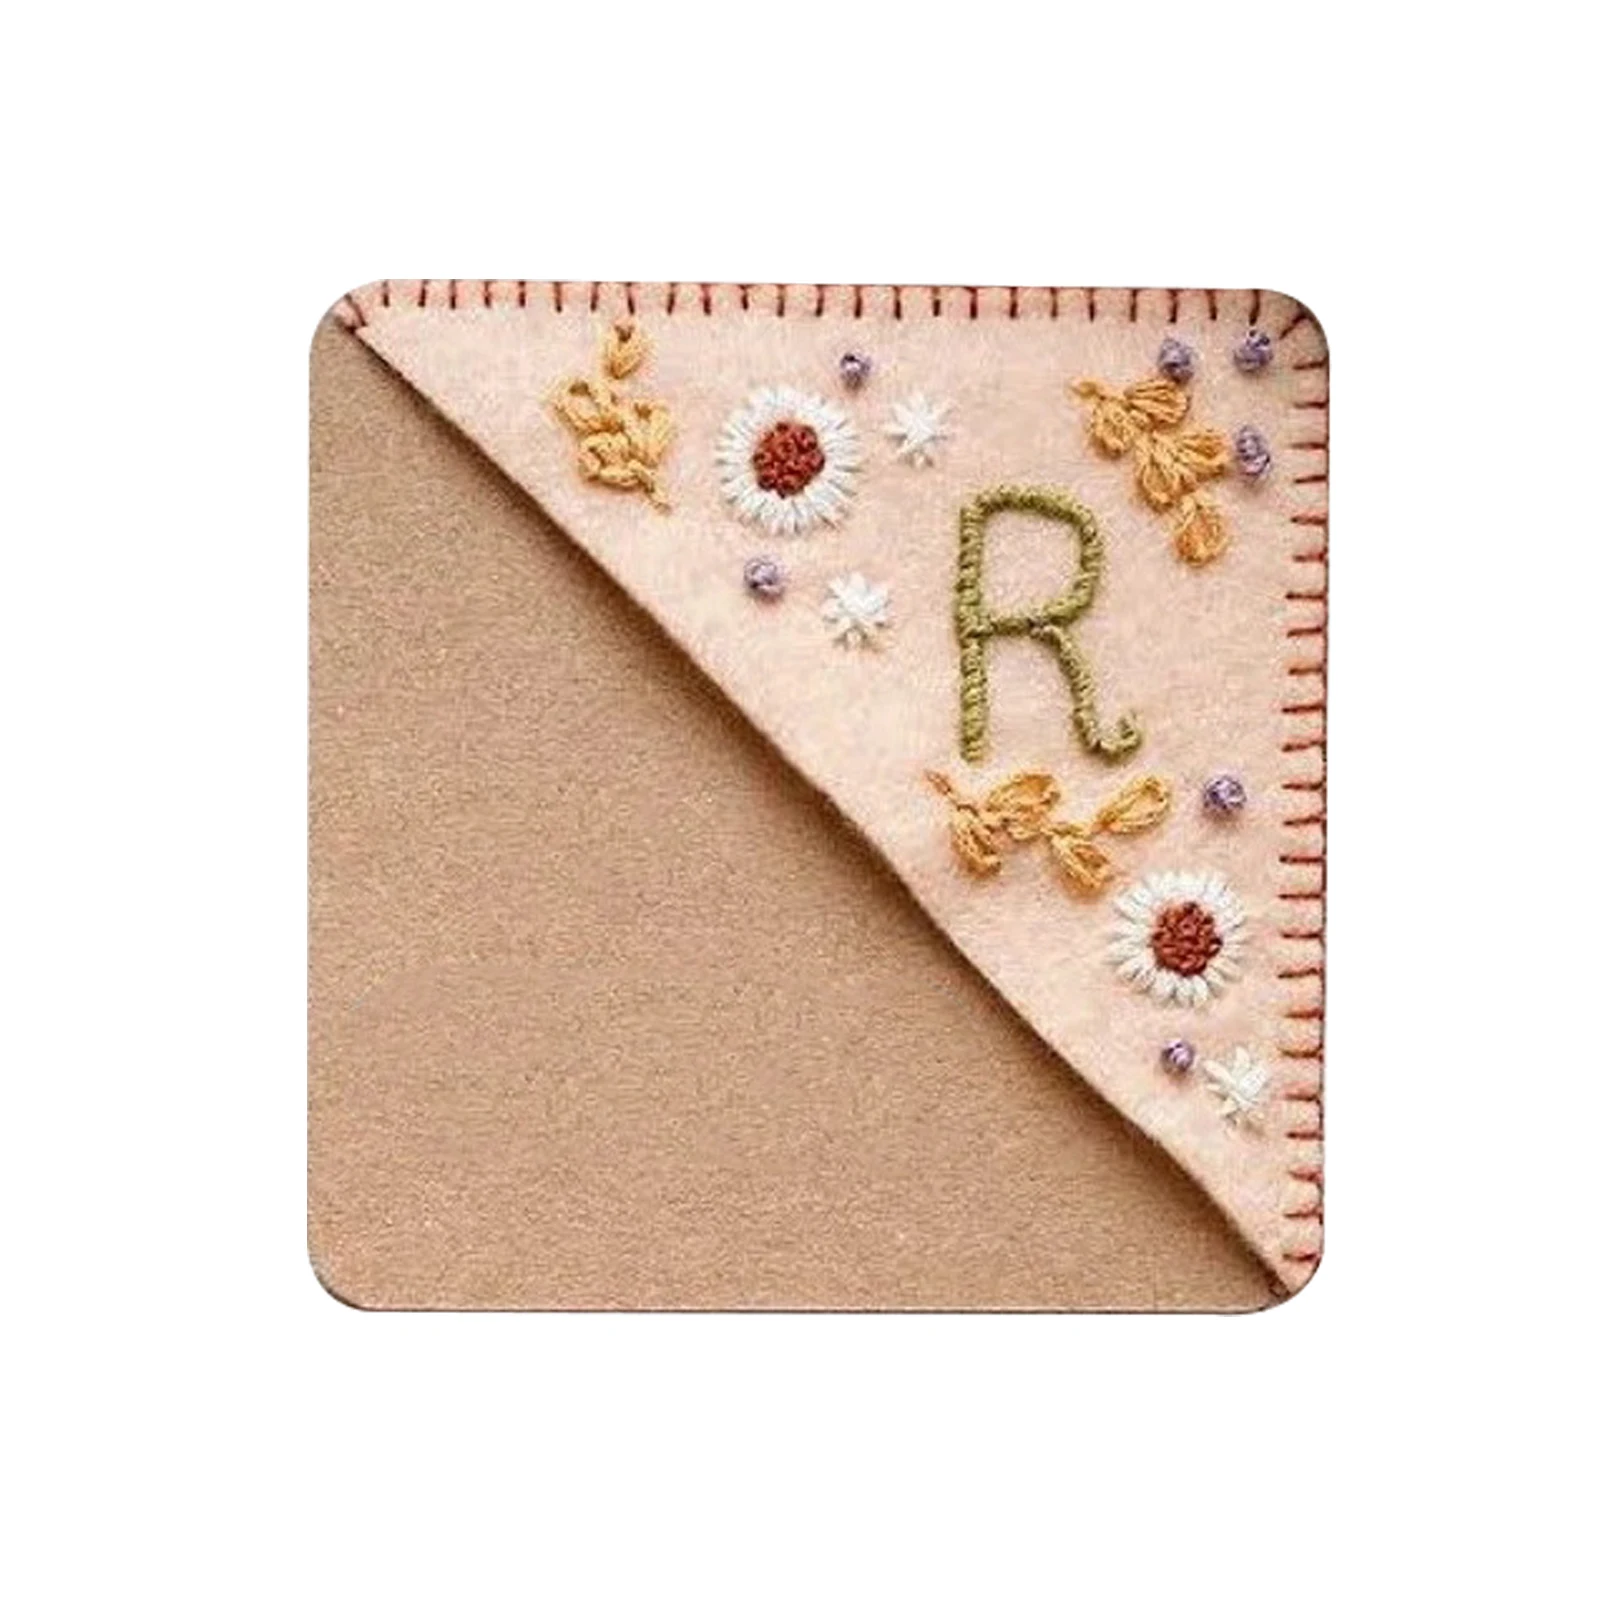 

Book Lover Men Women Reading Stitched Corner Bookmark Felt Triangle Wear Resistant Gift Sturdy Hand Embroidered Flower Letter